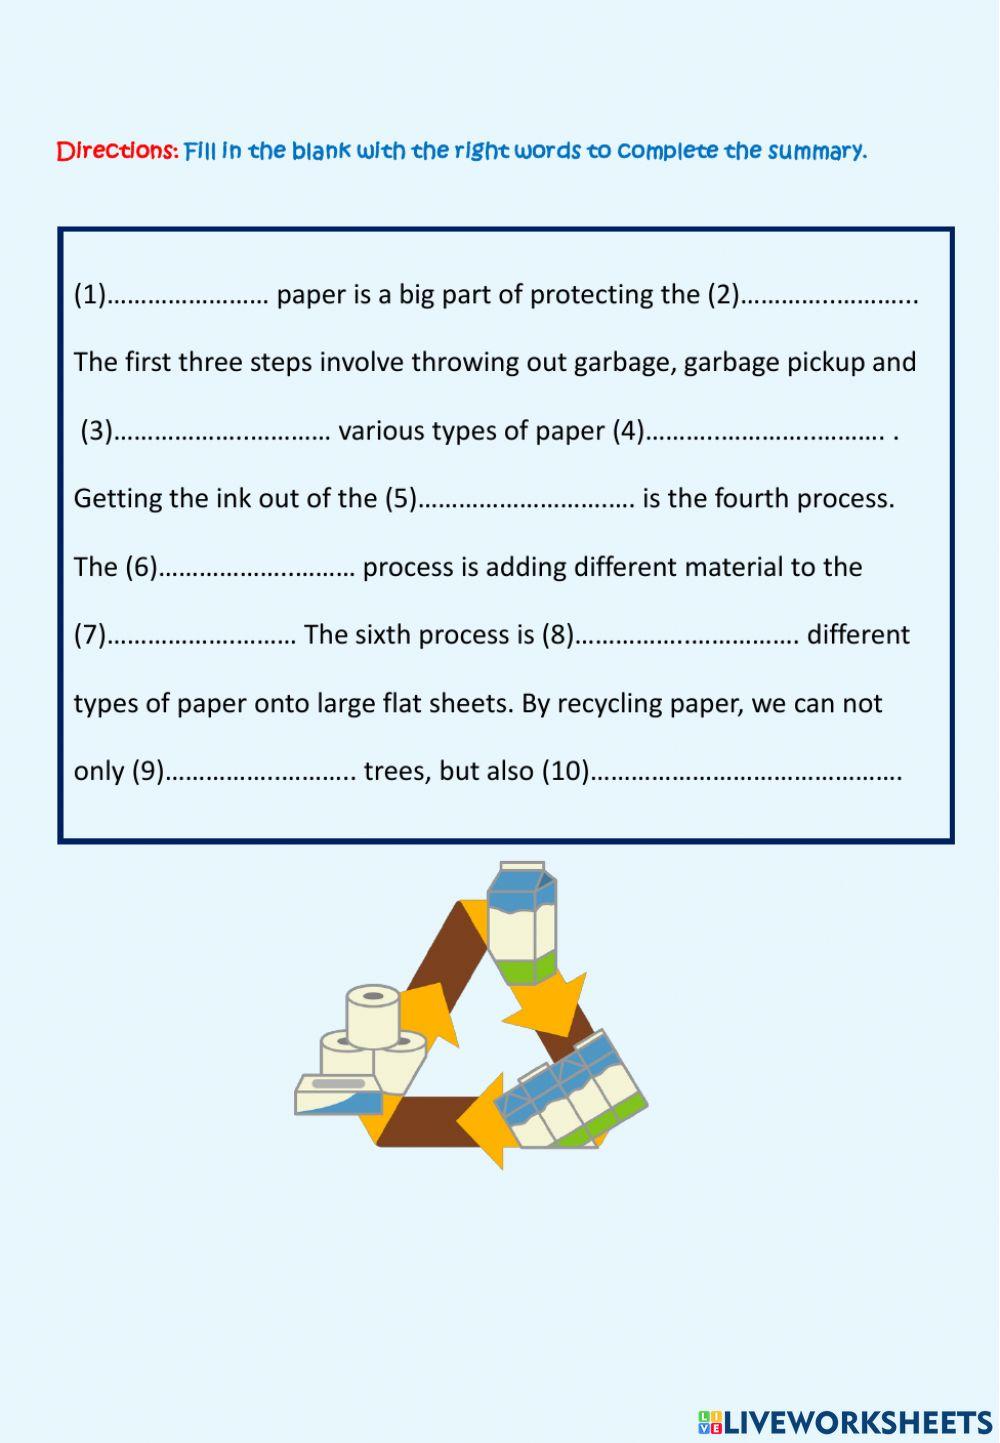 Process of Recycling Paper